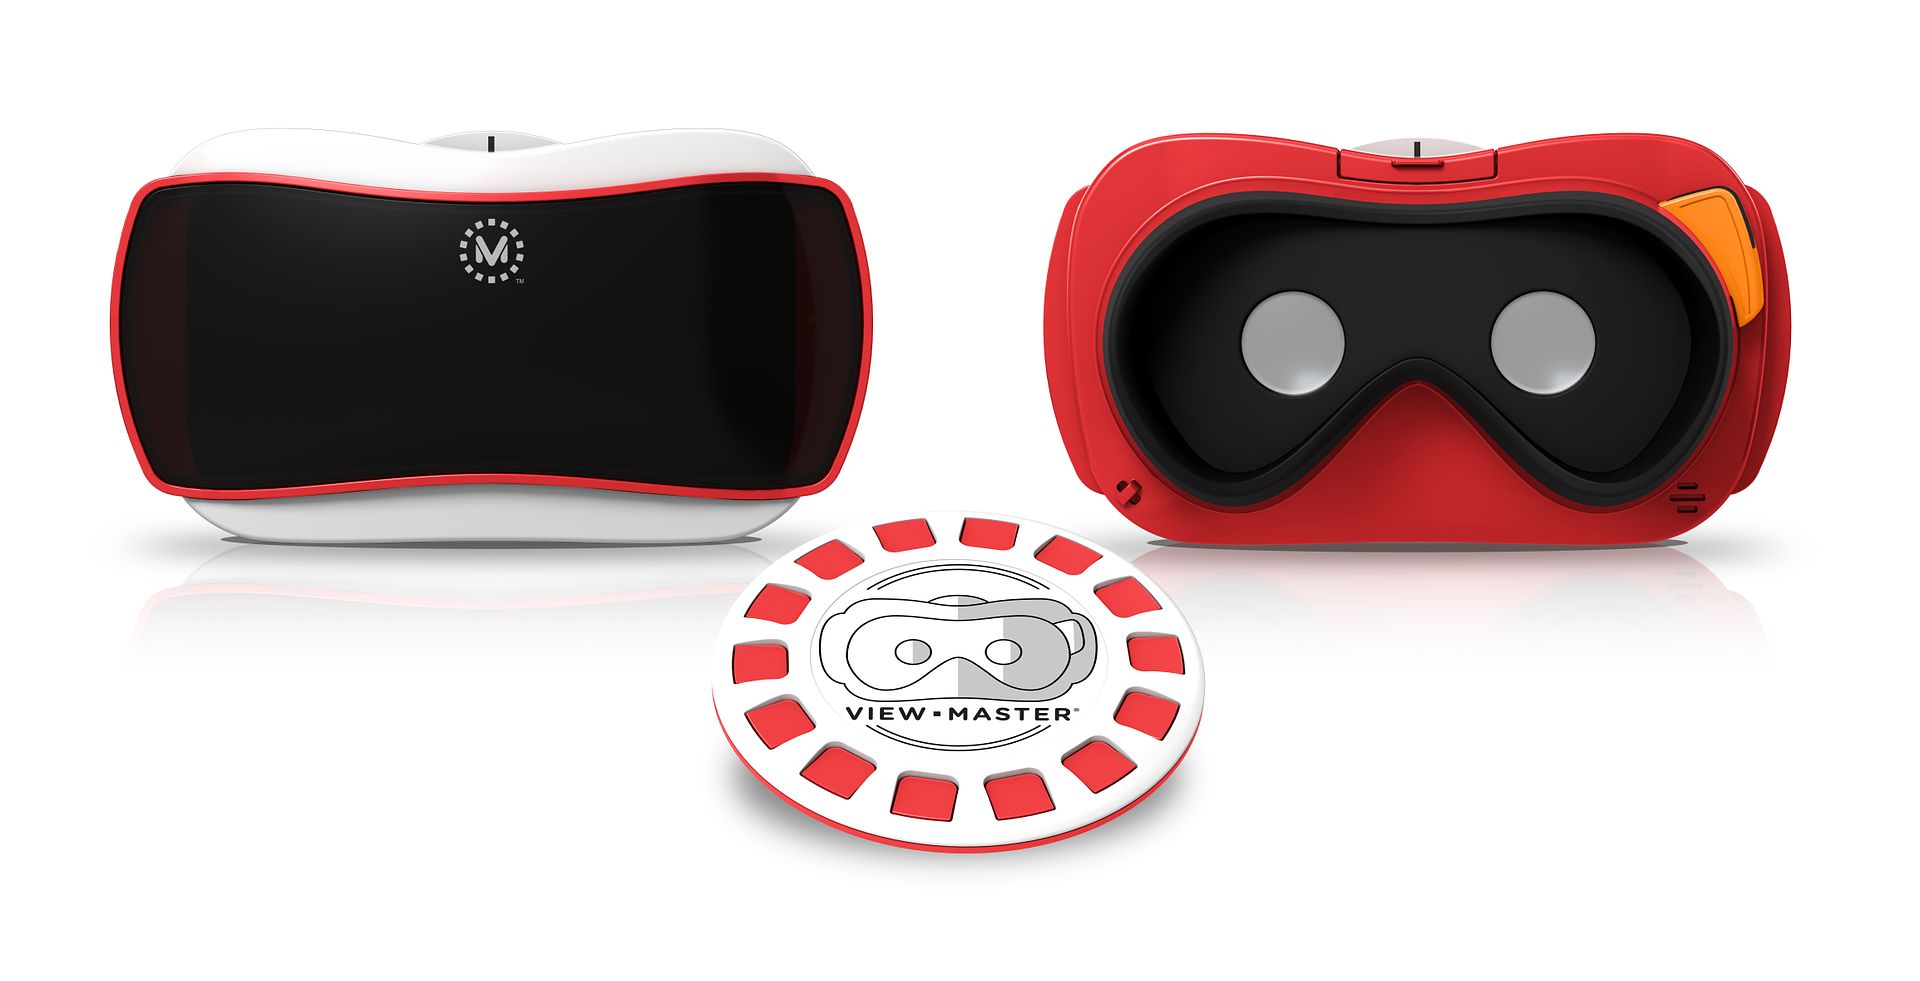 View-Master Virtual Reality Start Pack toy for kids